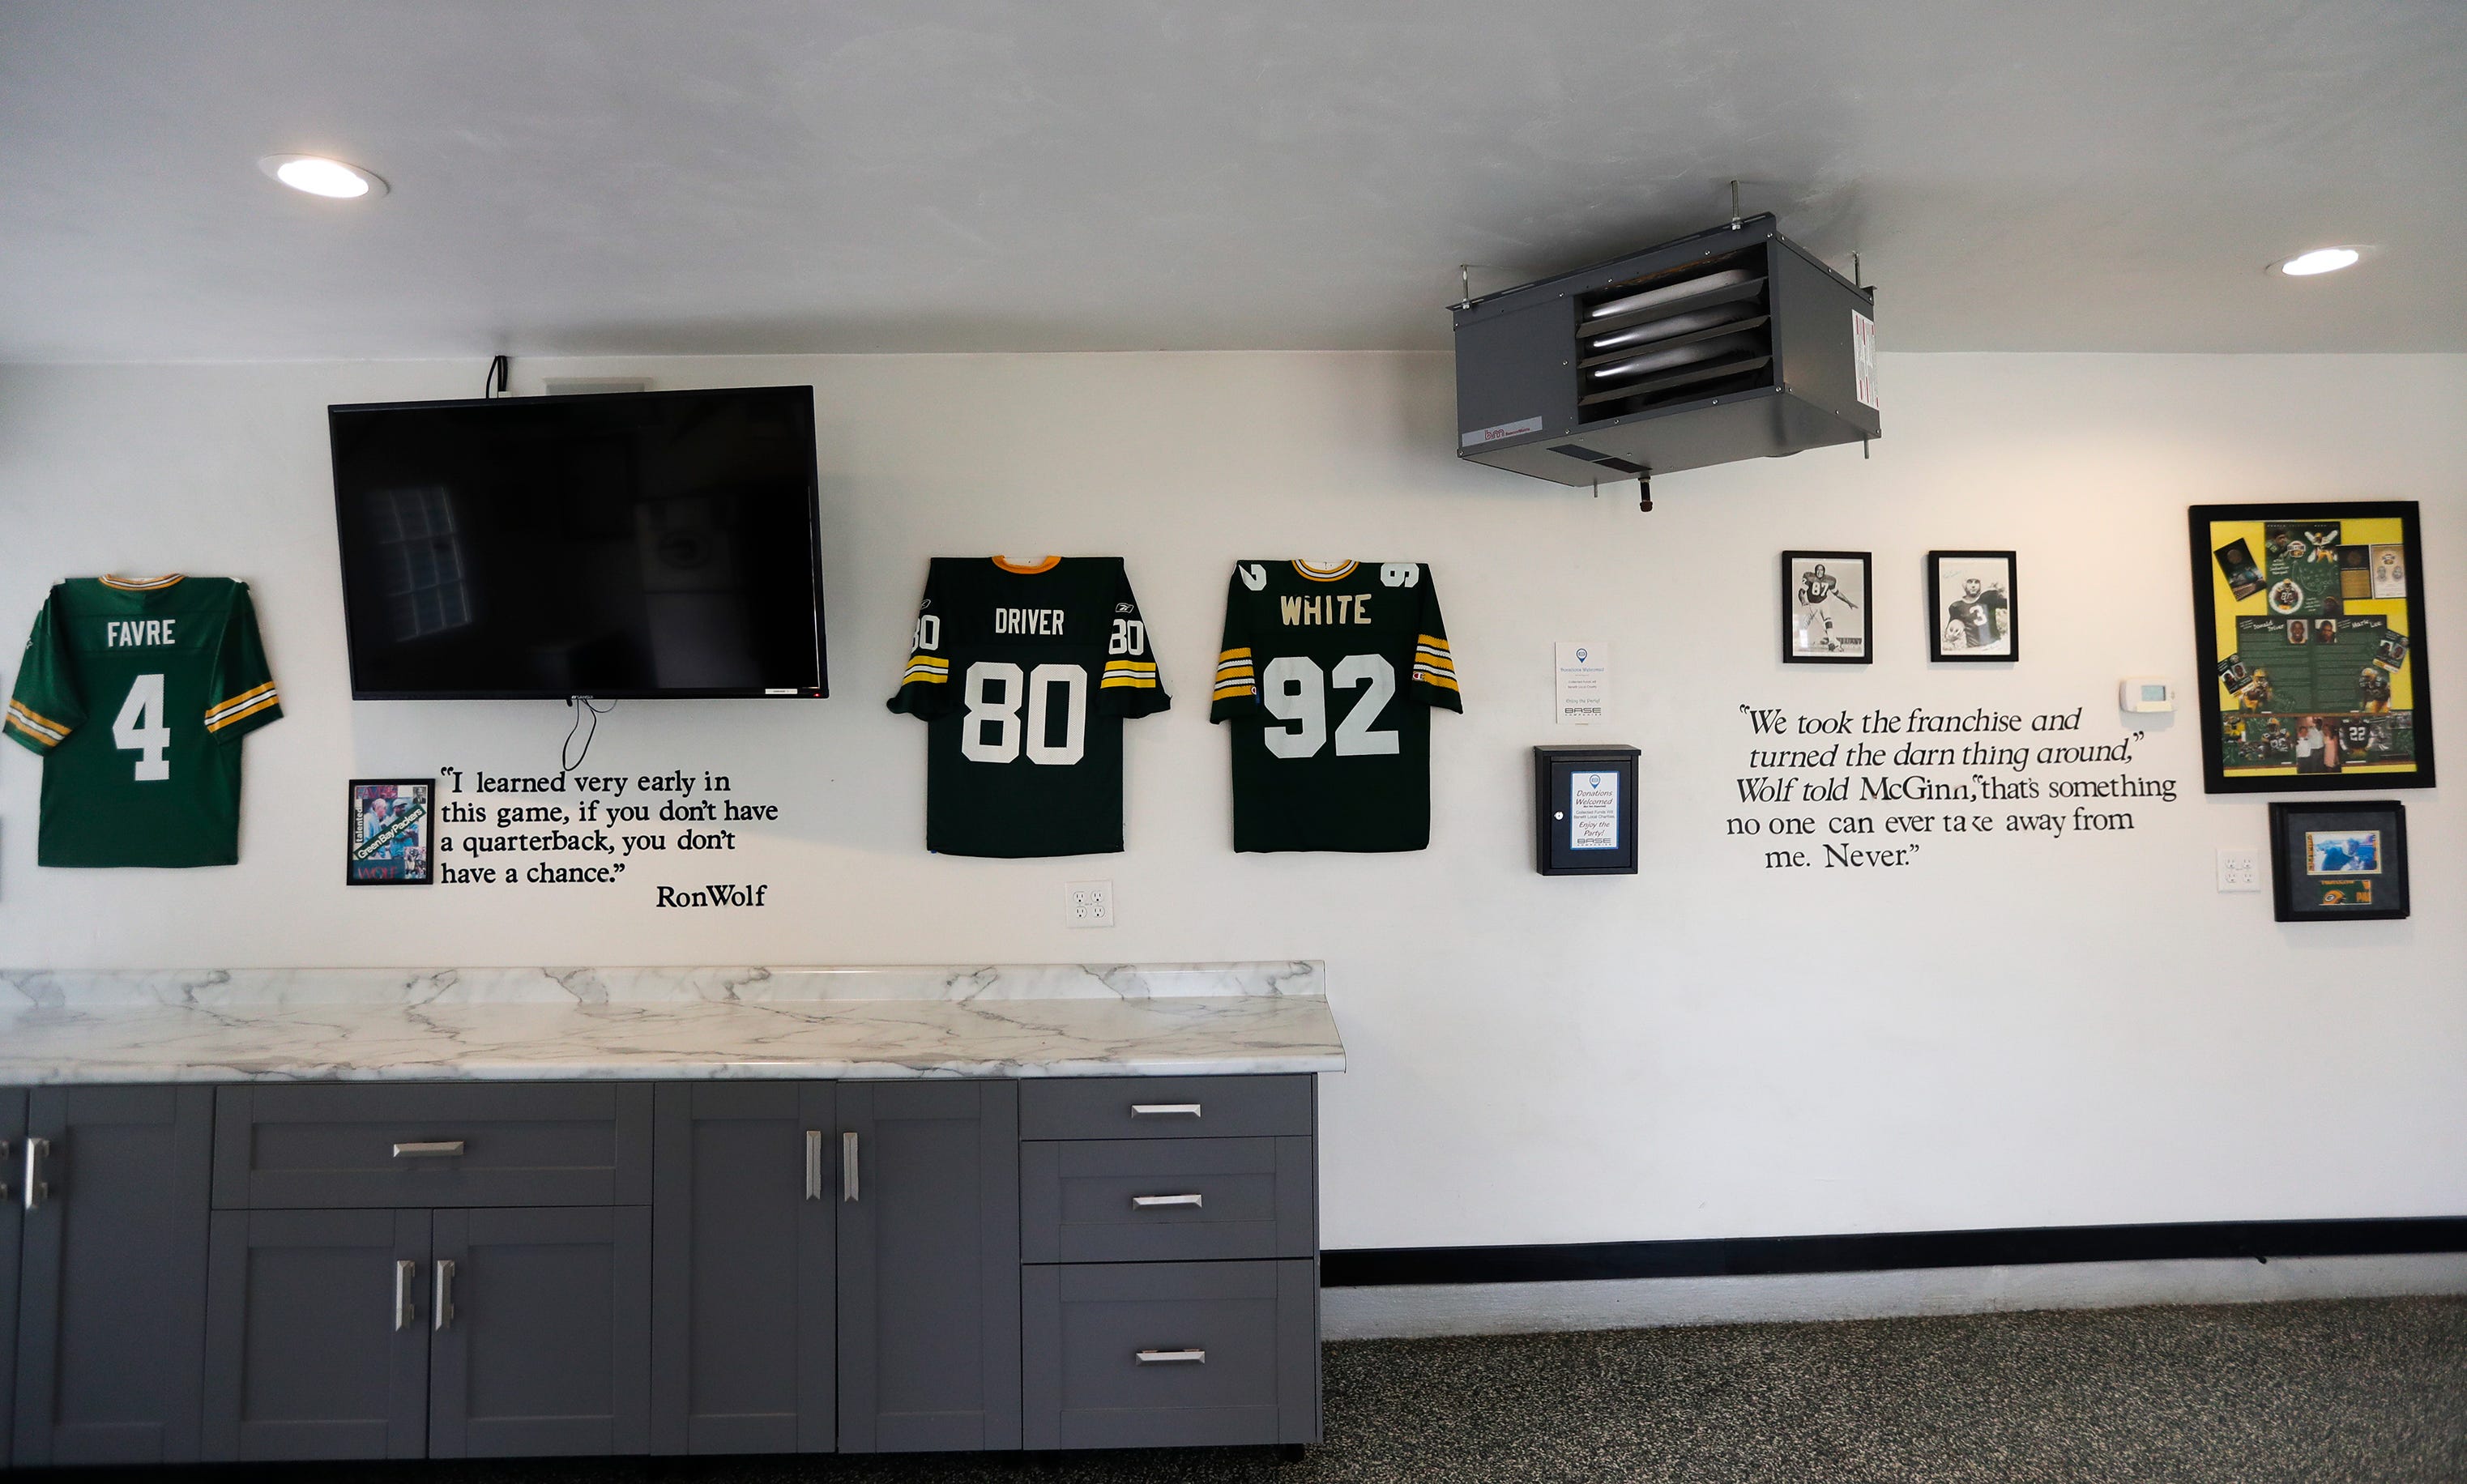 A look inside Zoi and Paul Belschner's rental house  at 1199 Shadow Lane in Ashwaubenon. Prices for the house across Lombardi Avenue from Lambeau field range from $300 per night to $4,500 for a full Green Bay Packers home game weekend.